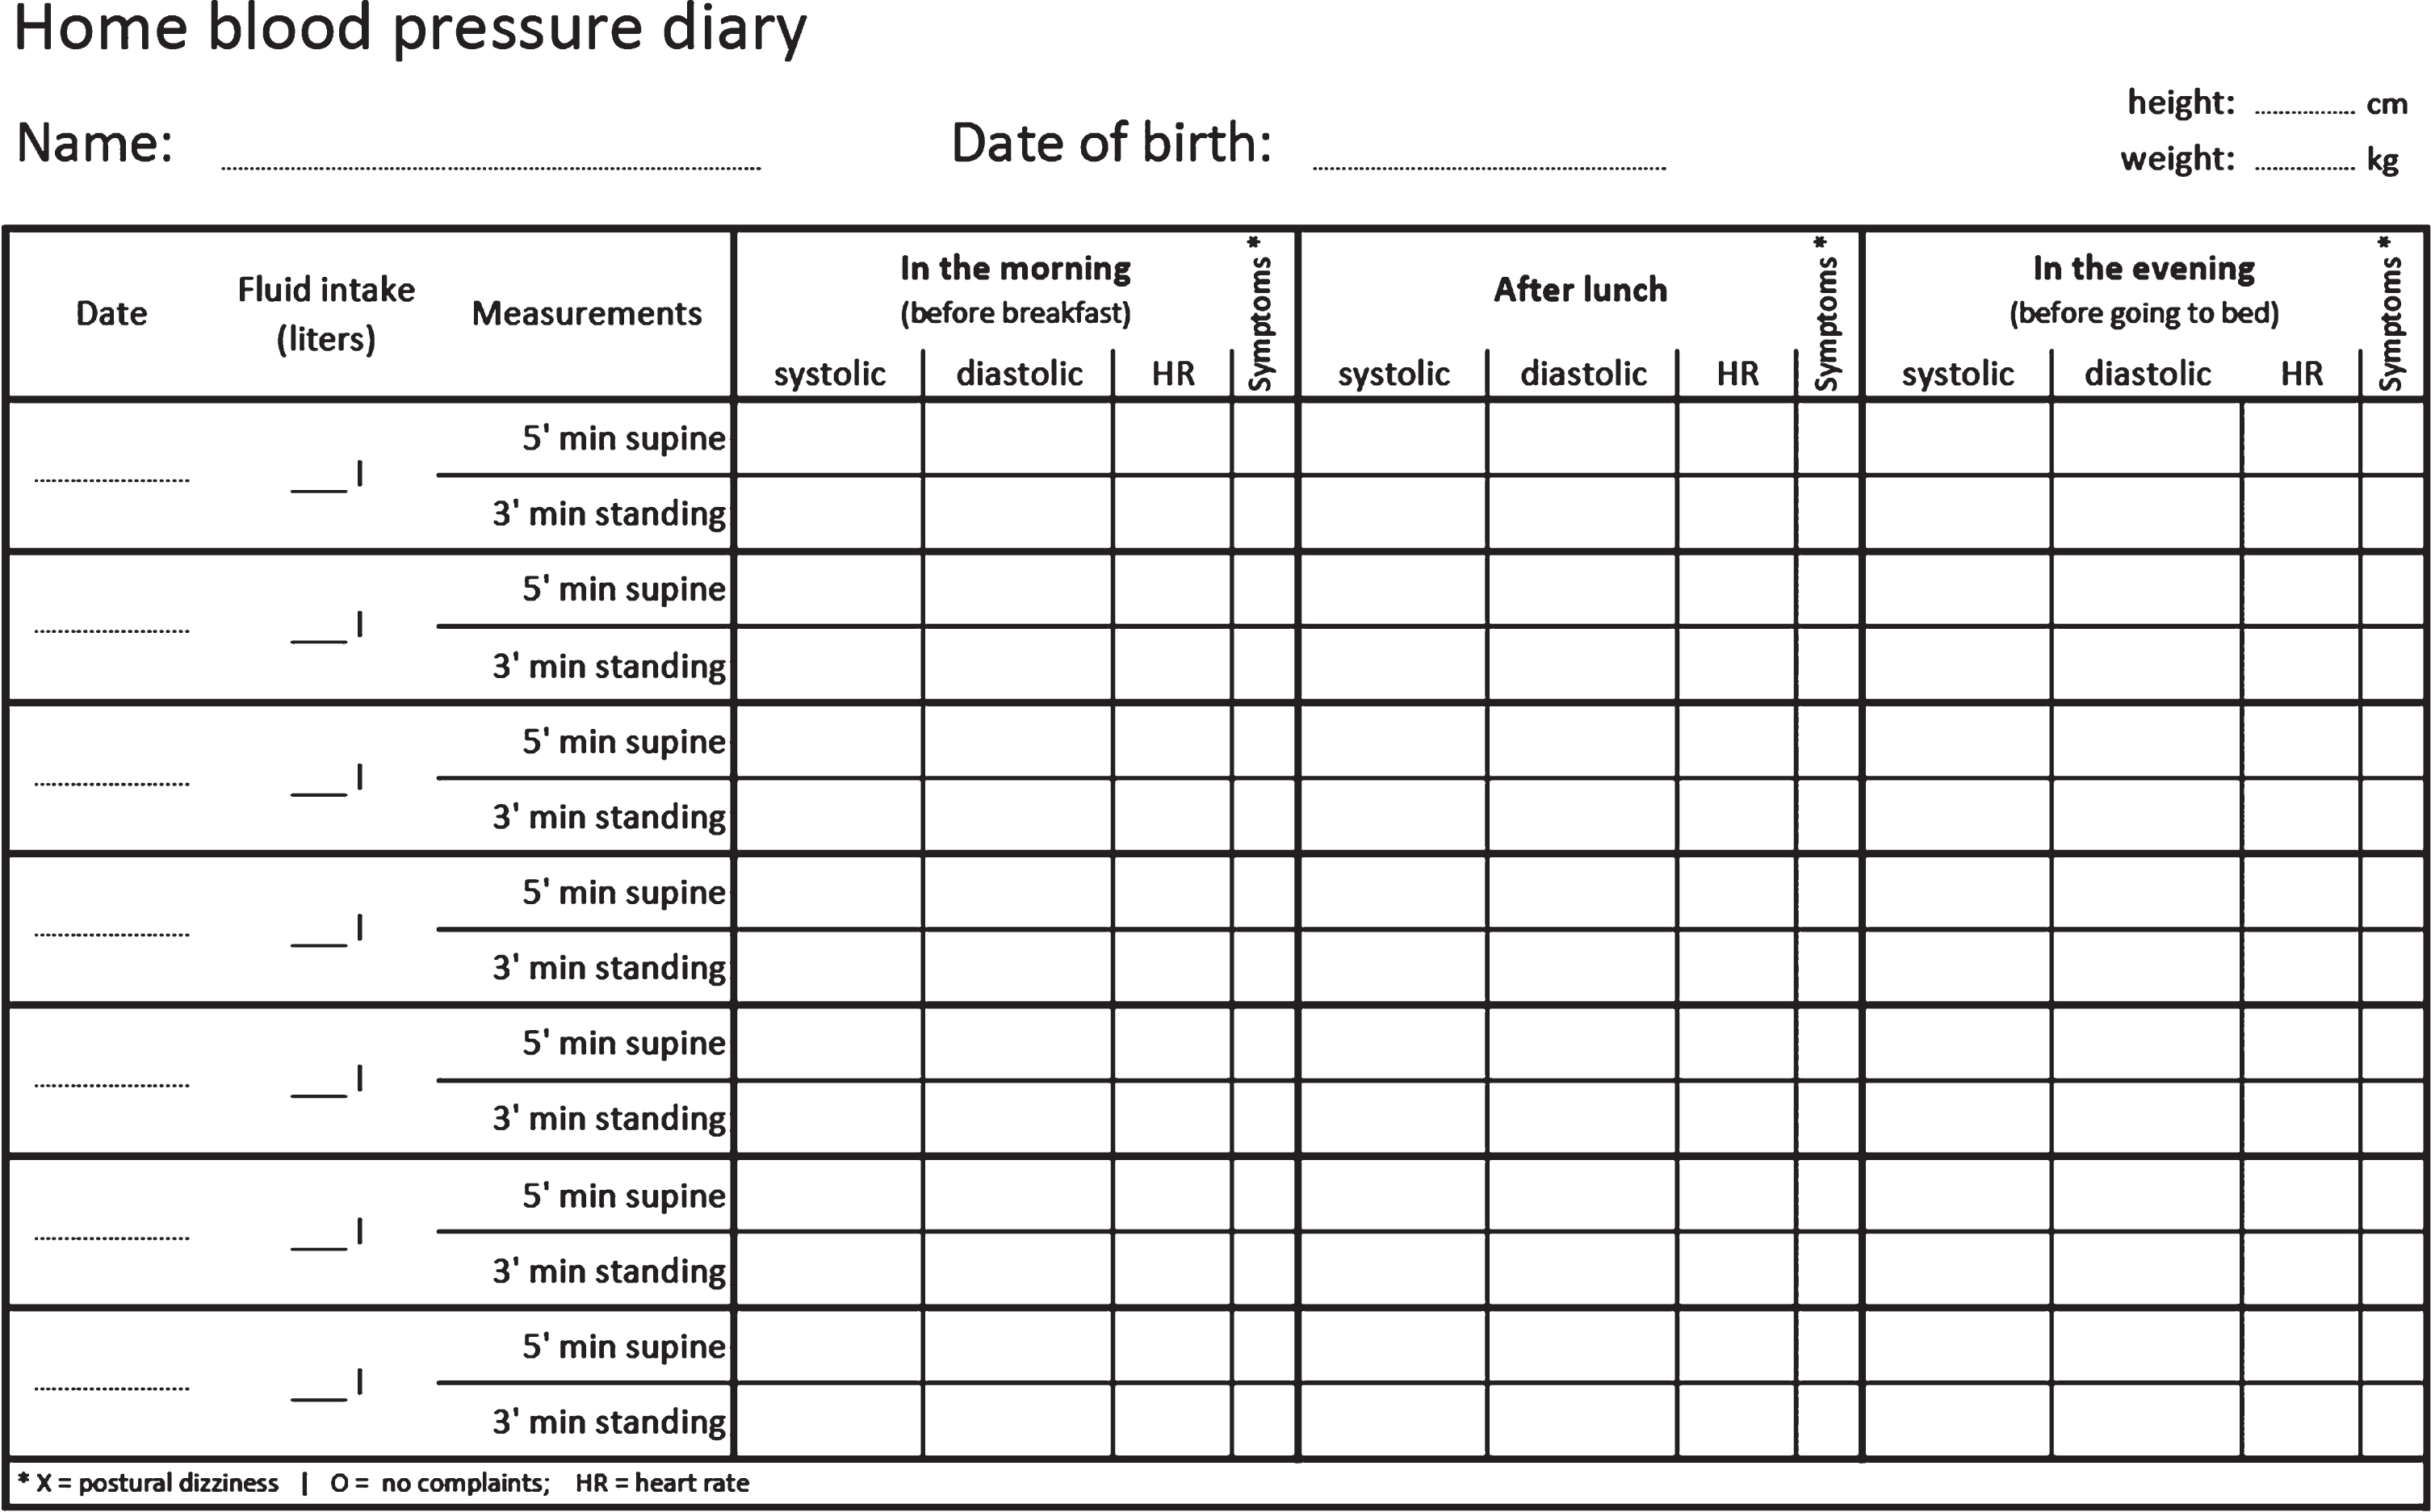 Template of a home blood pressure diary for patients with orthostatic hypotension.